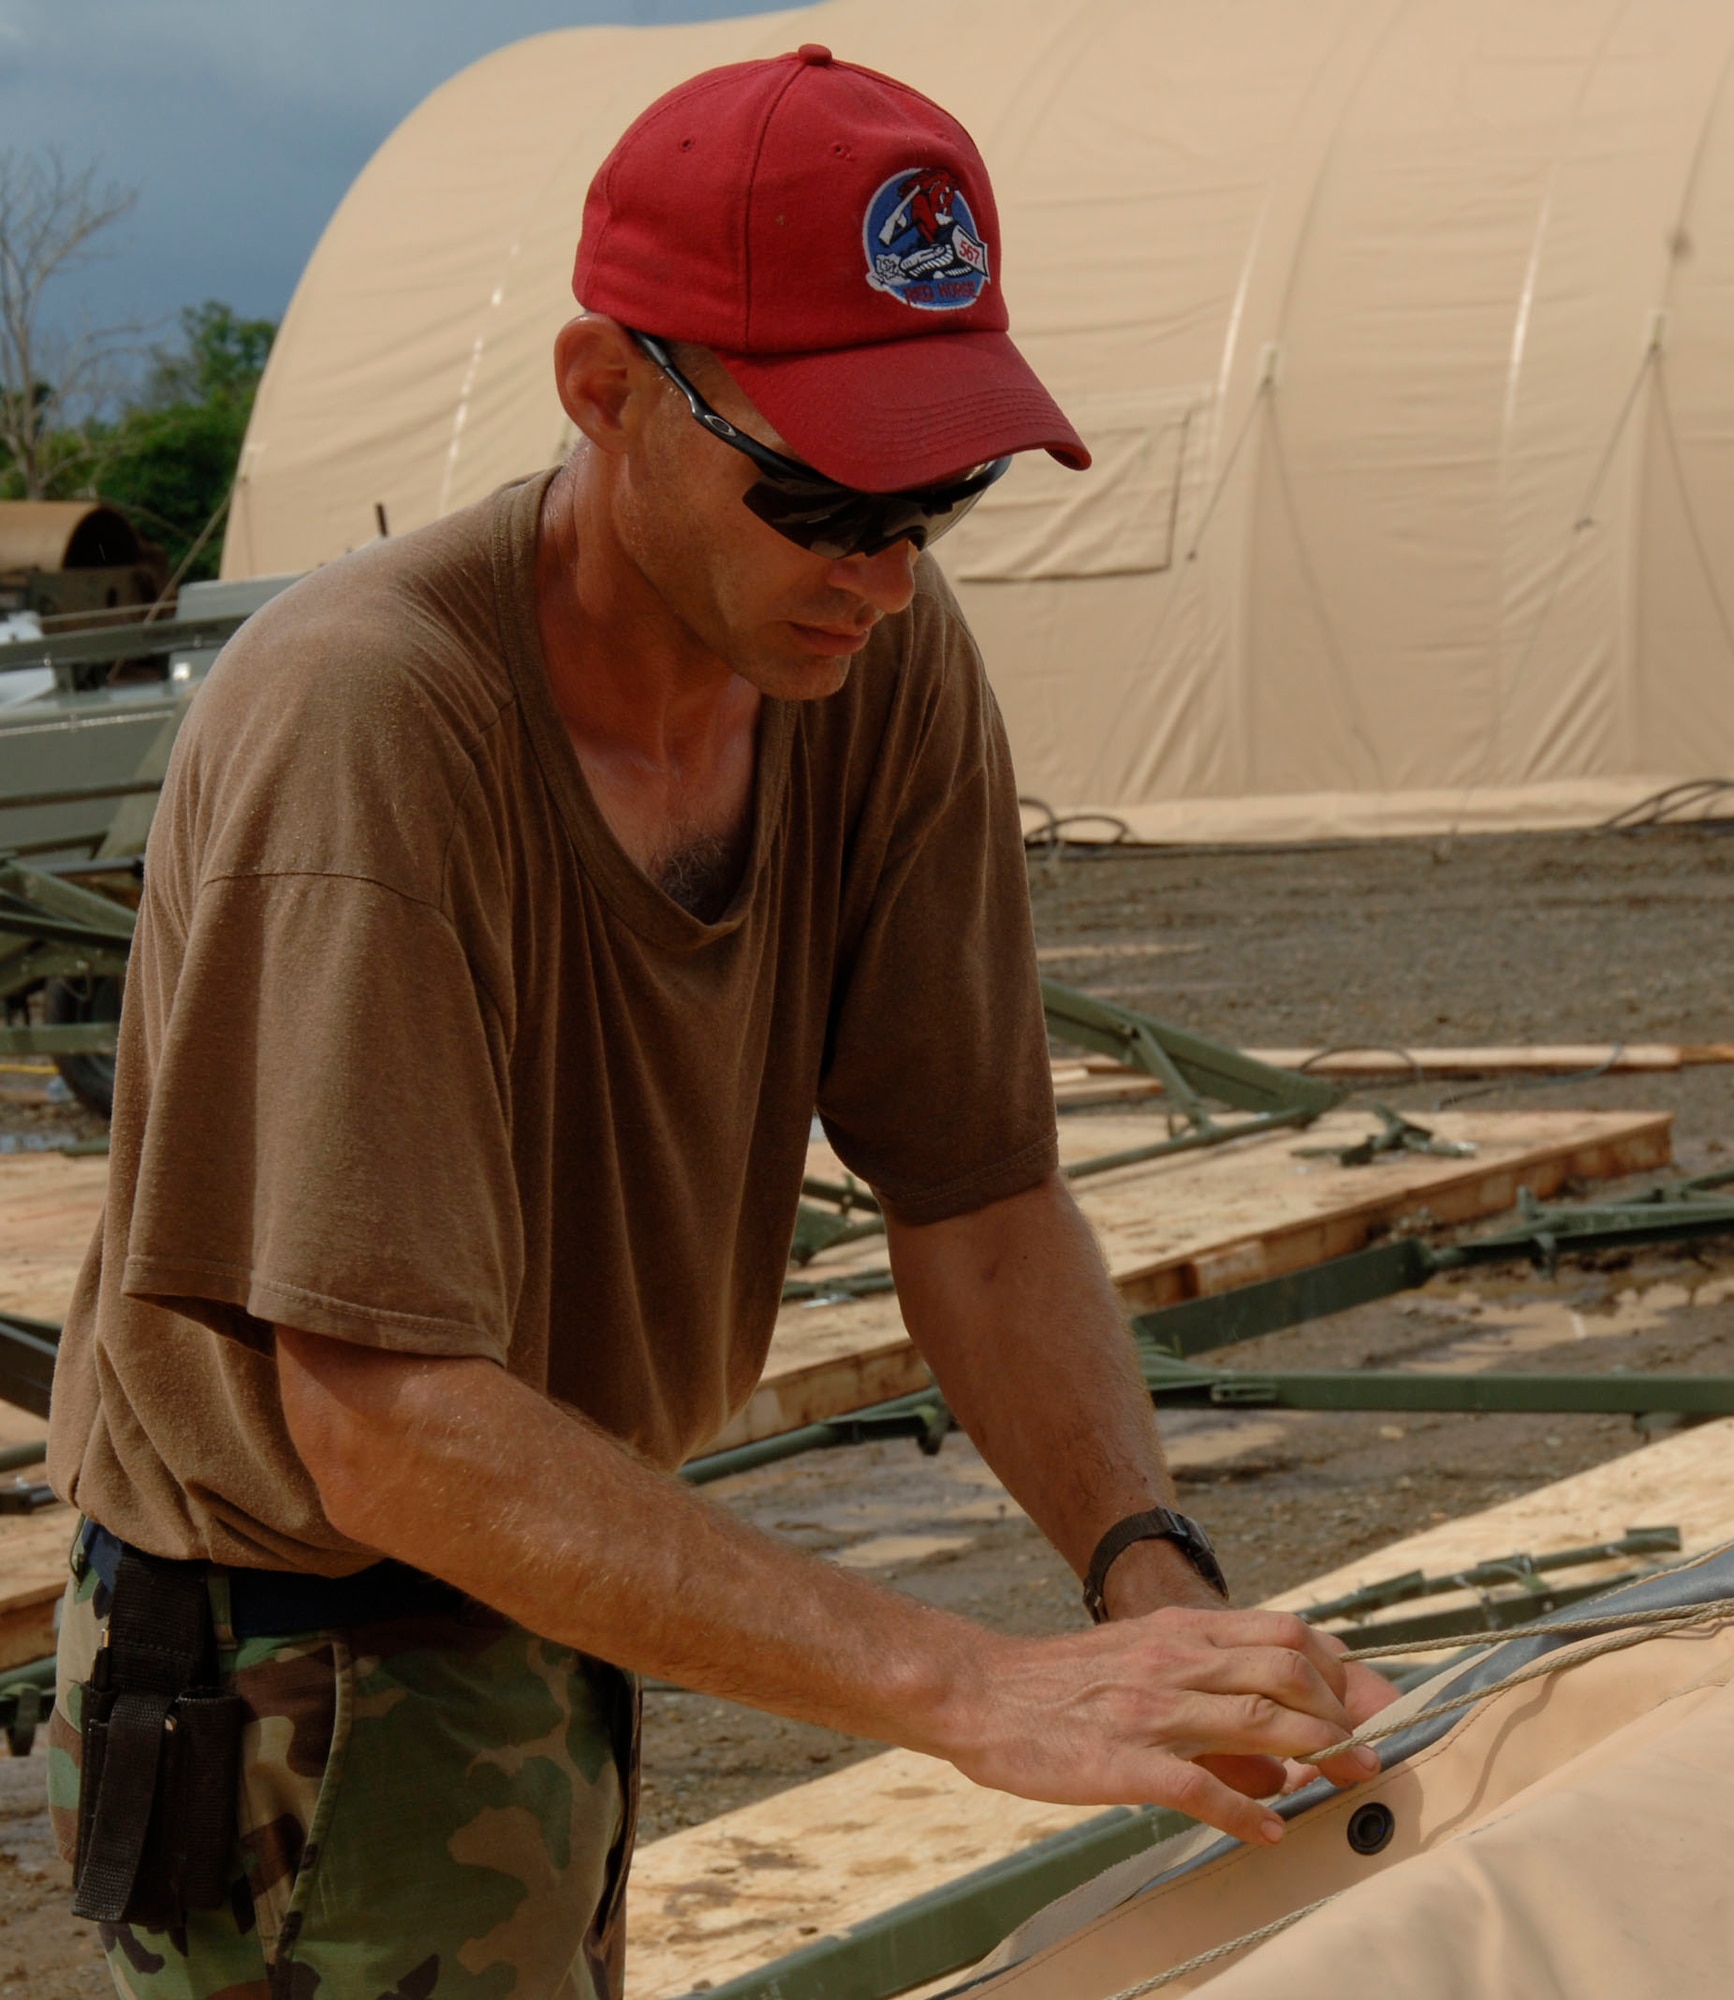 Master Sgt. Daniel Connolly, 567th RED HORSE Squadron, laces a roof section together for the dining tent at the temporary encampment that will house more than 250 Airmen, Soldiers, and Marines for New Horizons Panama 2010. (U.S. Air Force photo/Tech. Sgt. Eric Petosky)